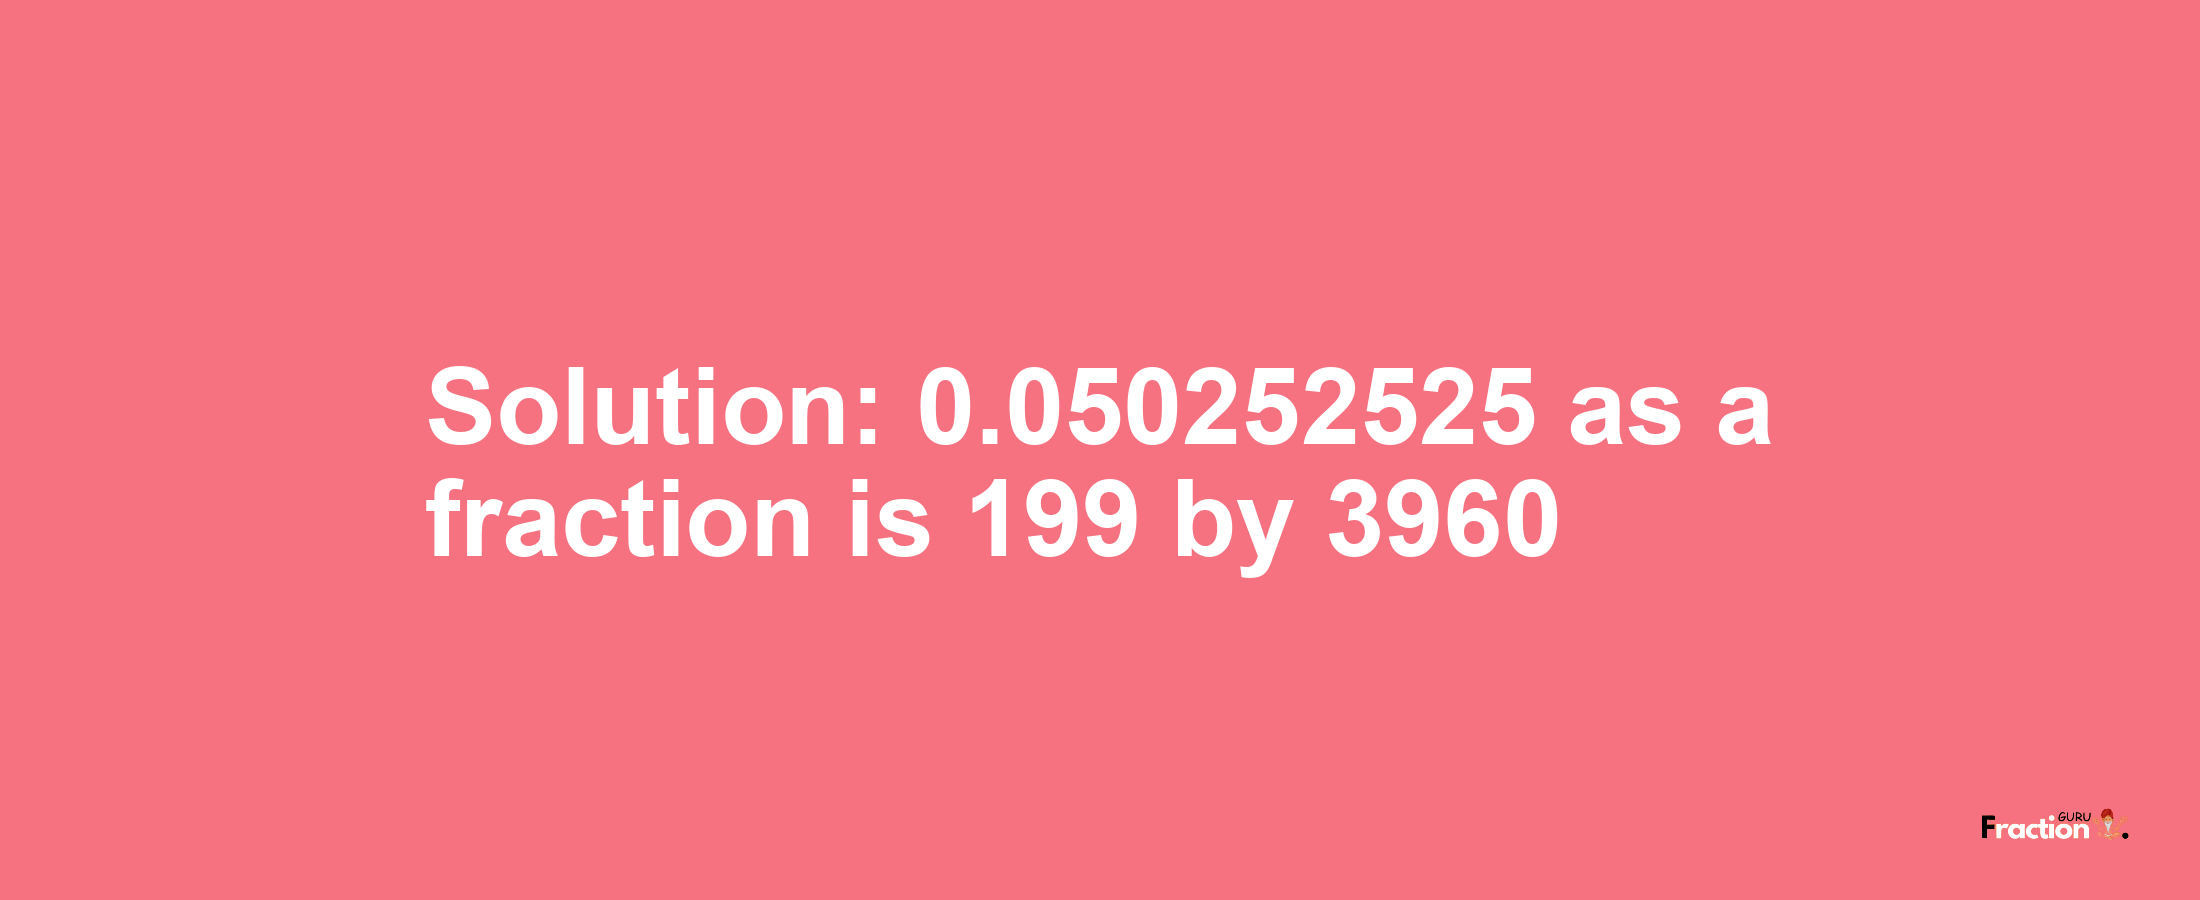 Solution:0.050252525 as a fraction is 199/3960